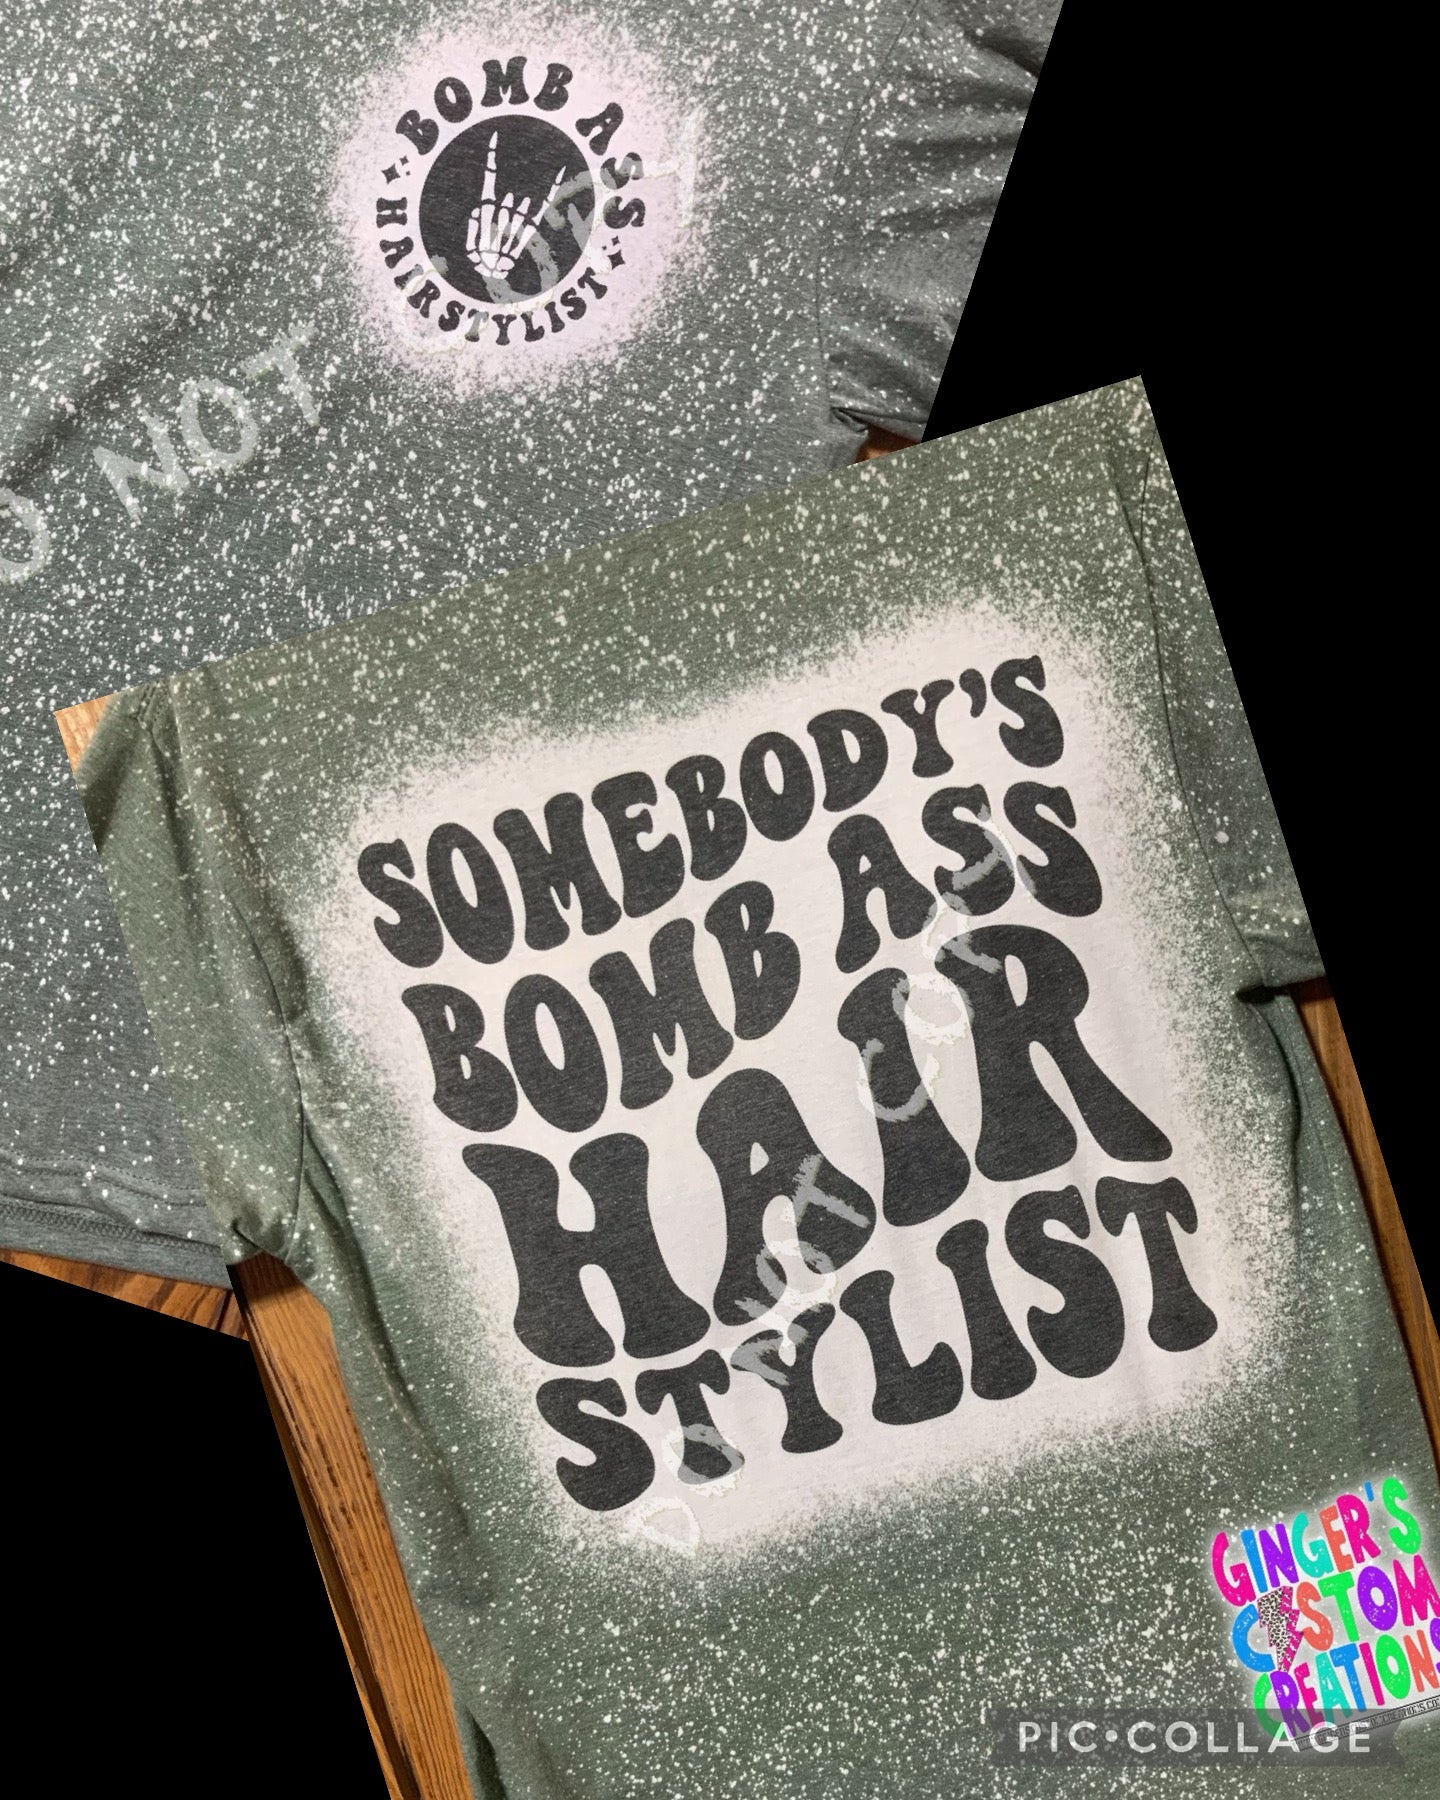 SOMEBODYS BOMB ASS HAIR STYLIST - front&back   - BLEACHED TSHIRT